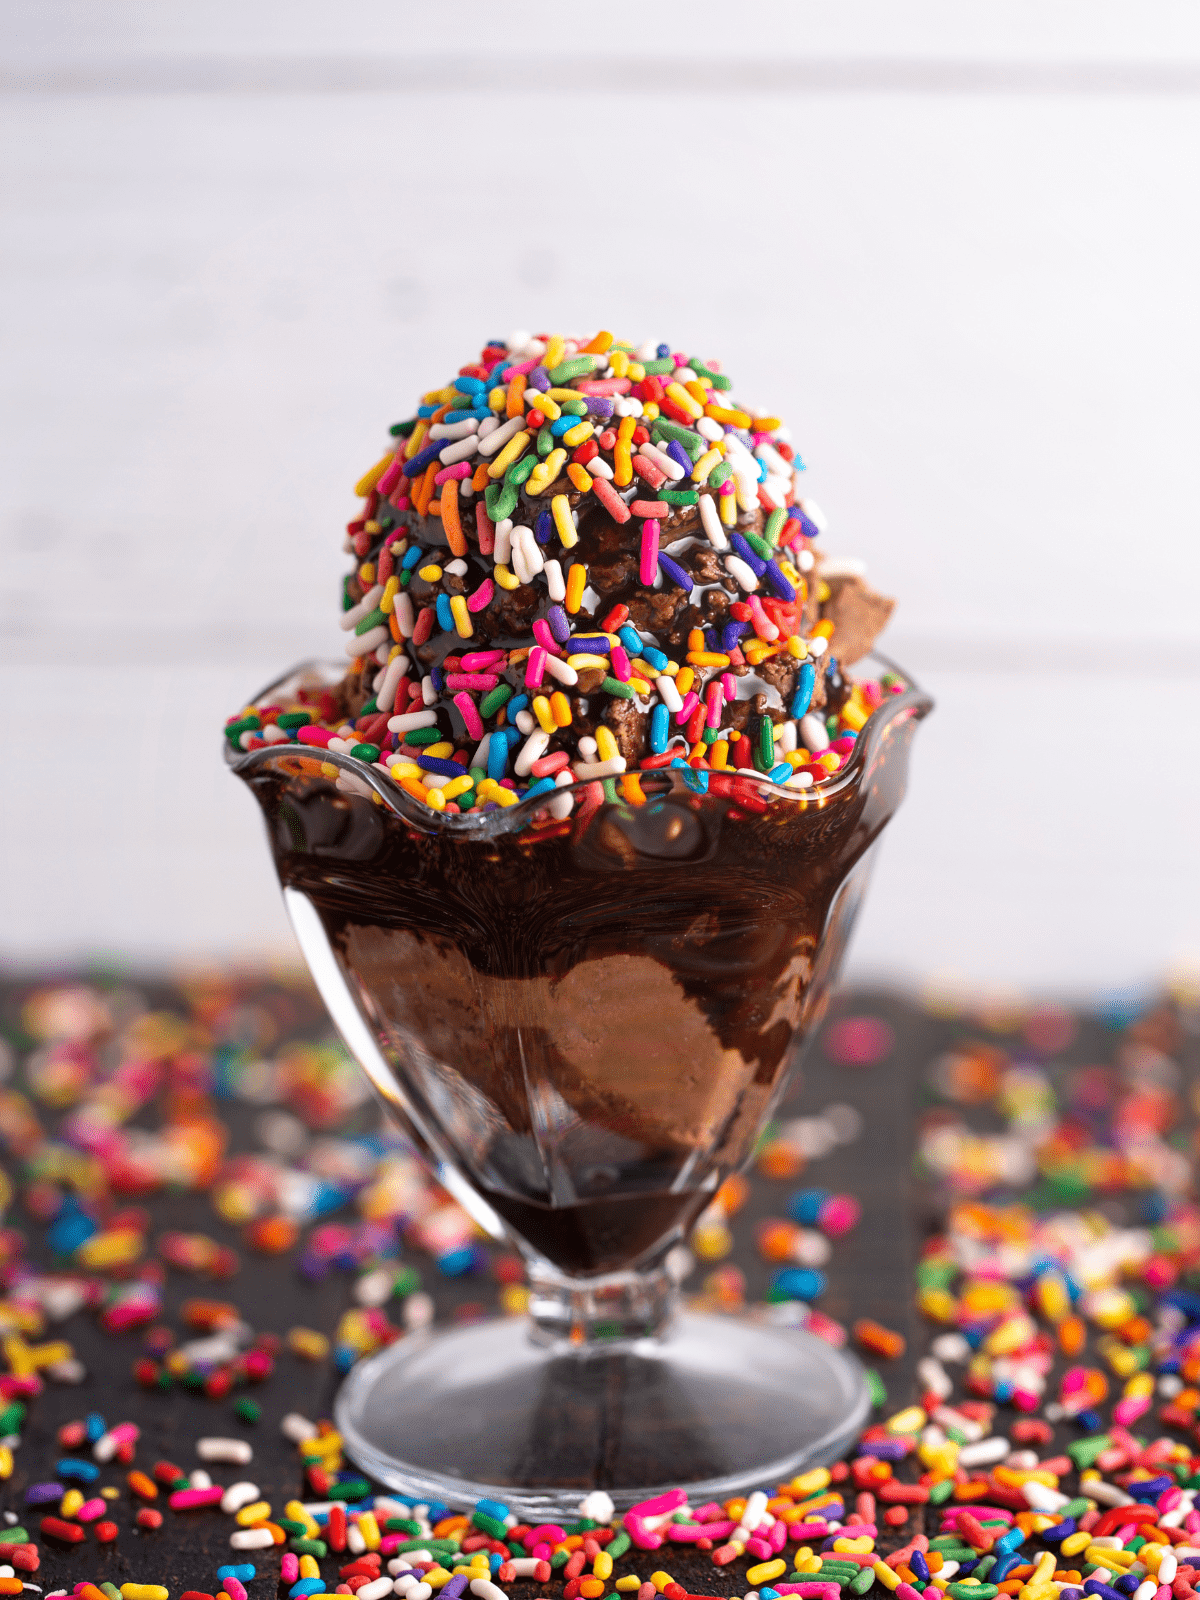 Chocolate ice cream topped with hot fudge and covered in rainbow sprinkles.